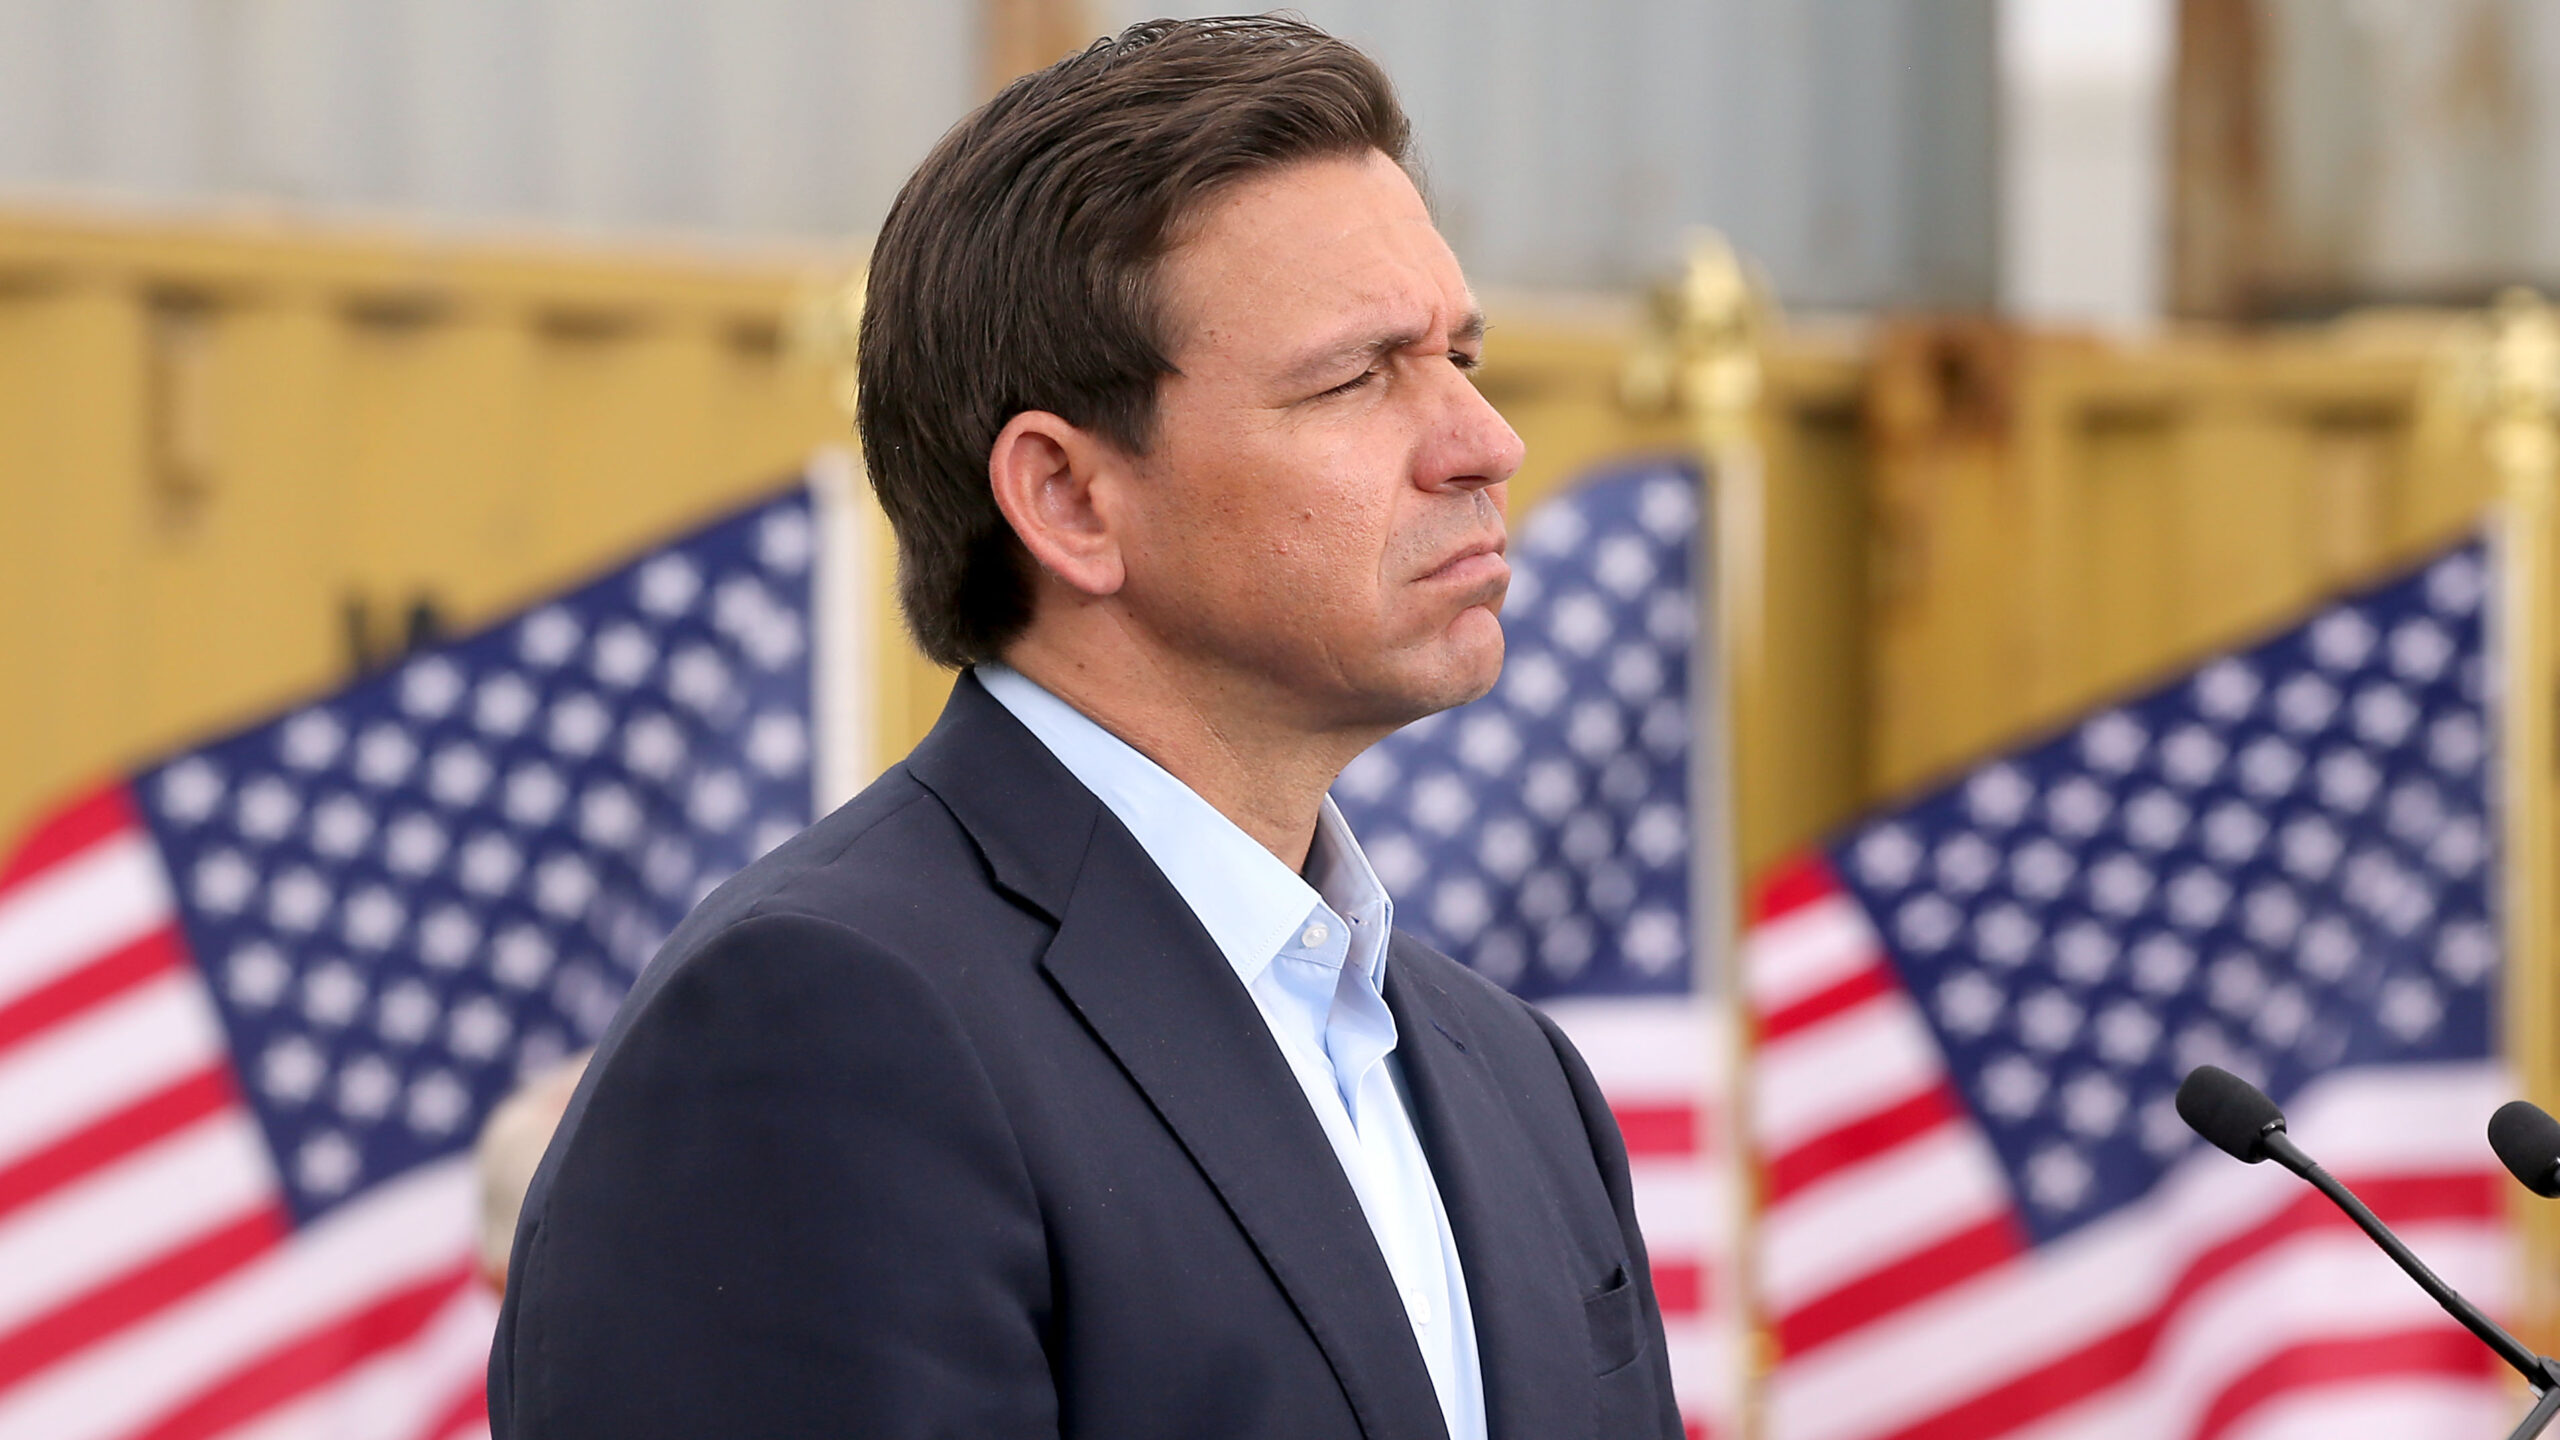 DeSantis warns of electric vehicles’ threat to US security and economy.